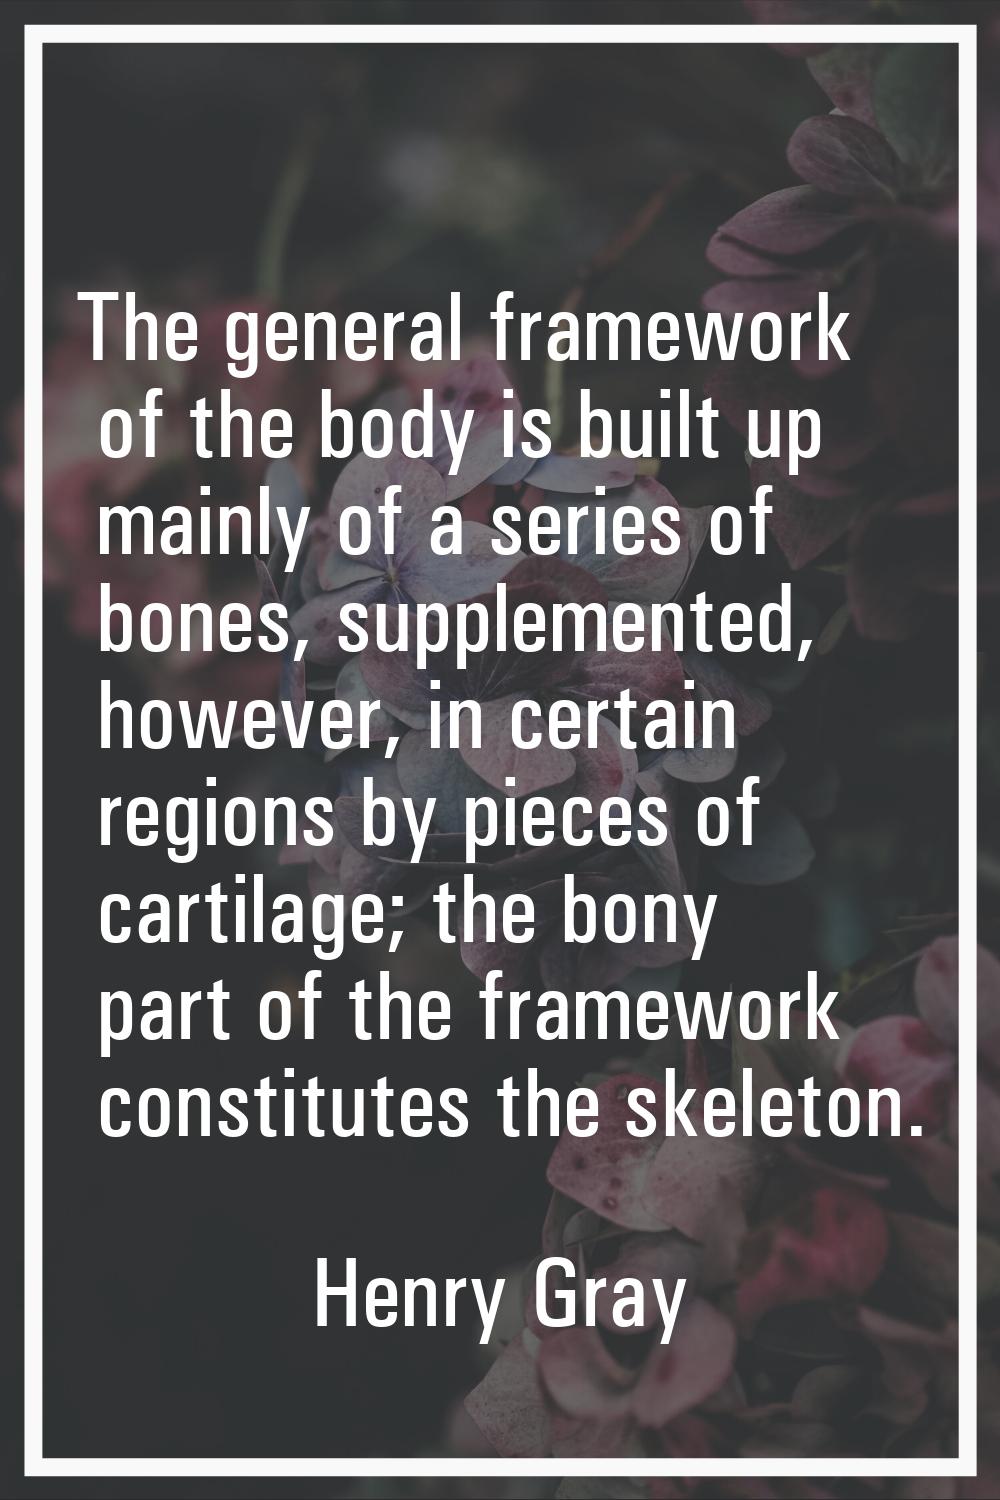 The general framework of the body is built up mainly of a series of bones, supplemented, however, i